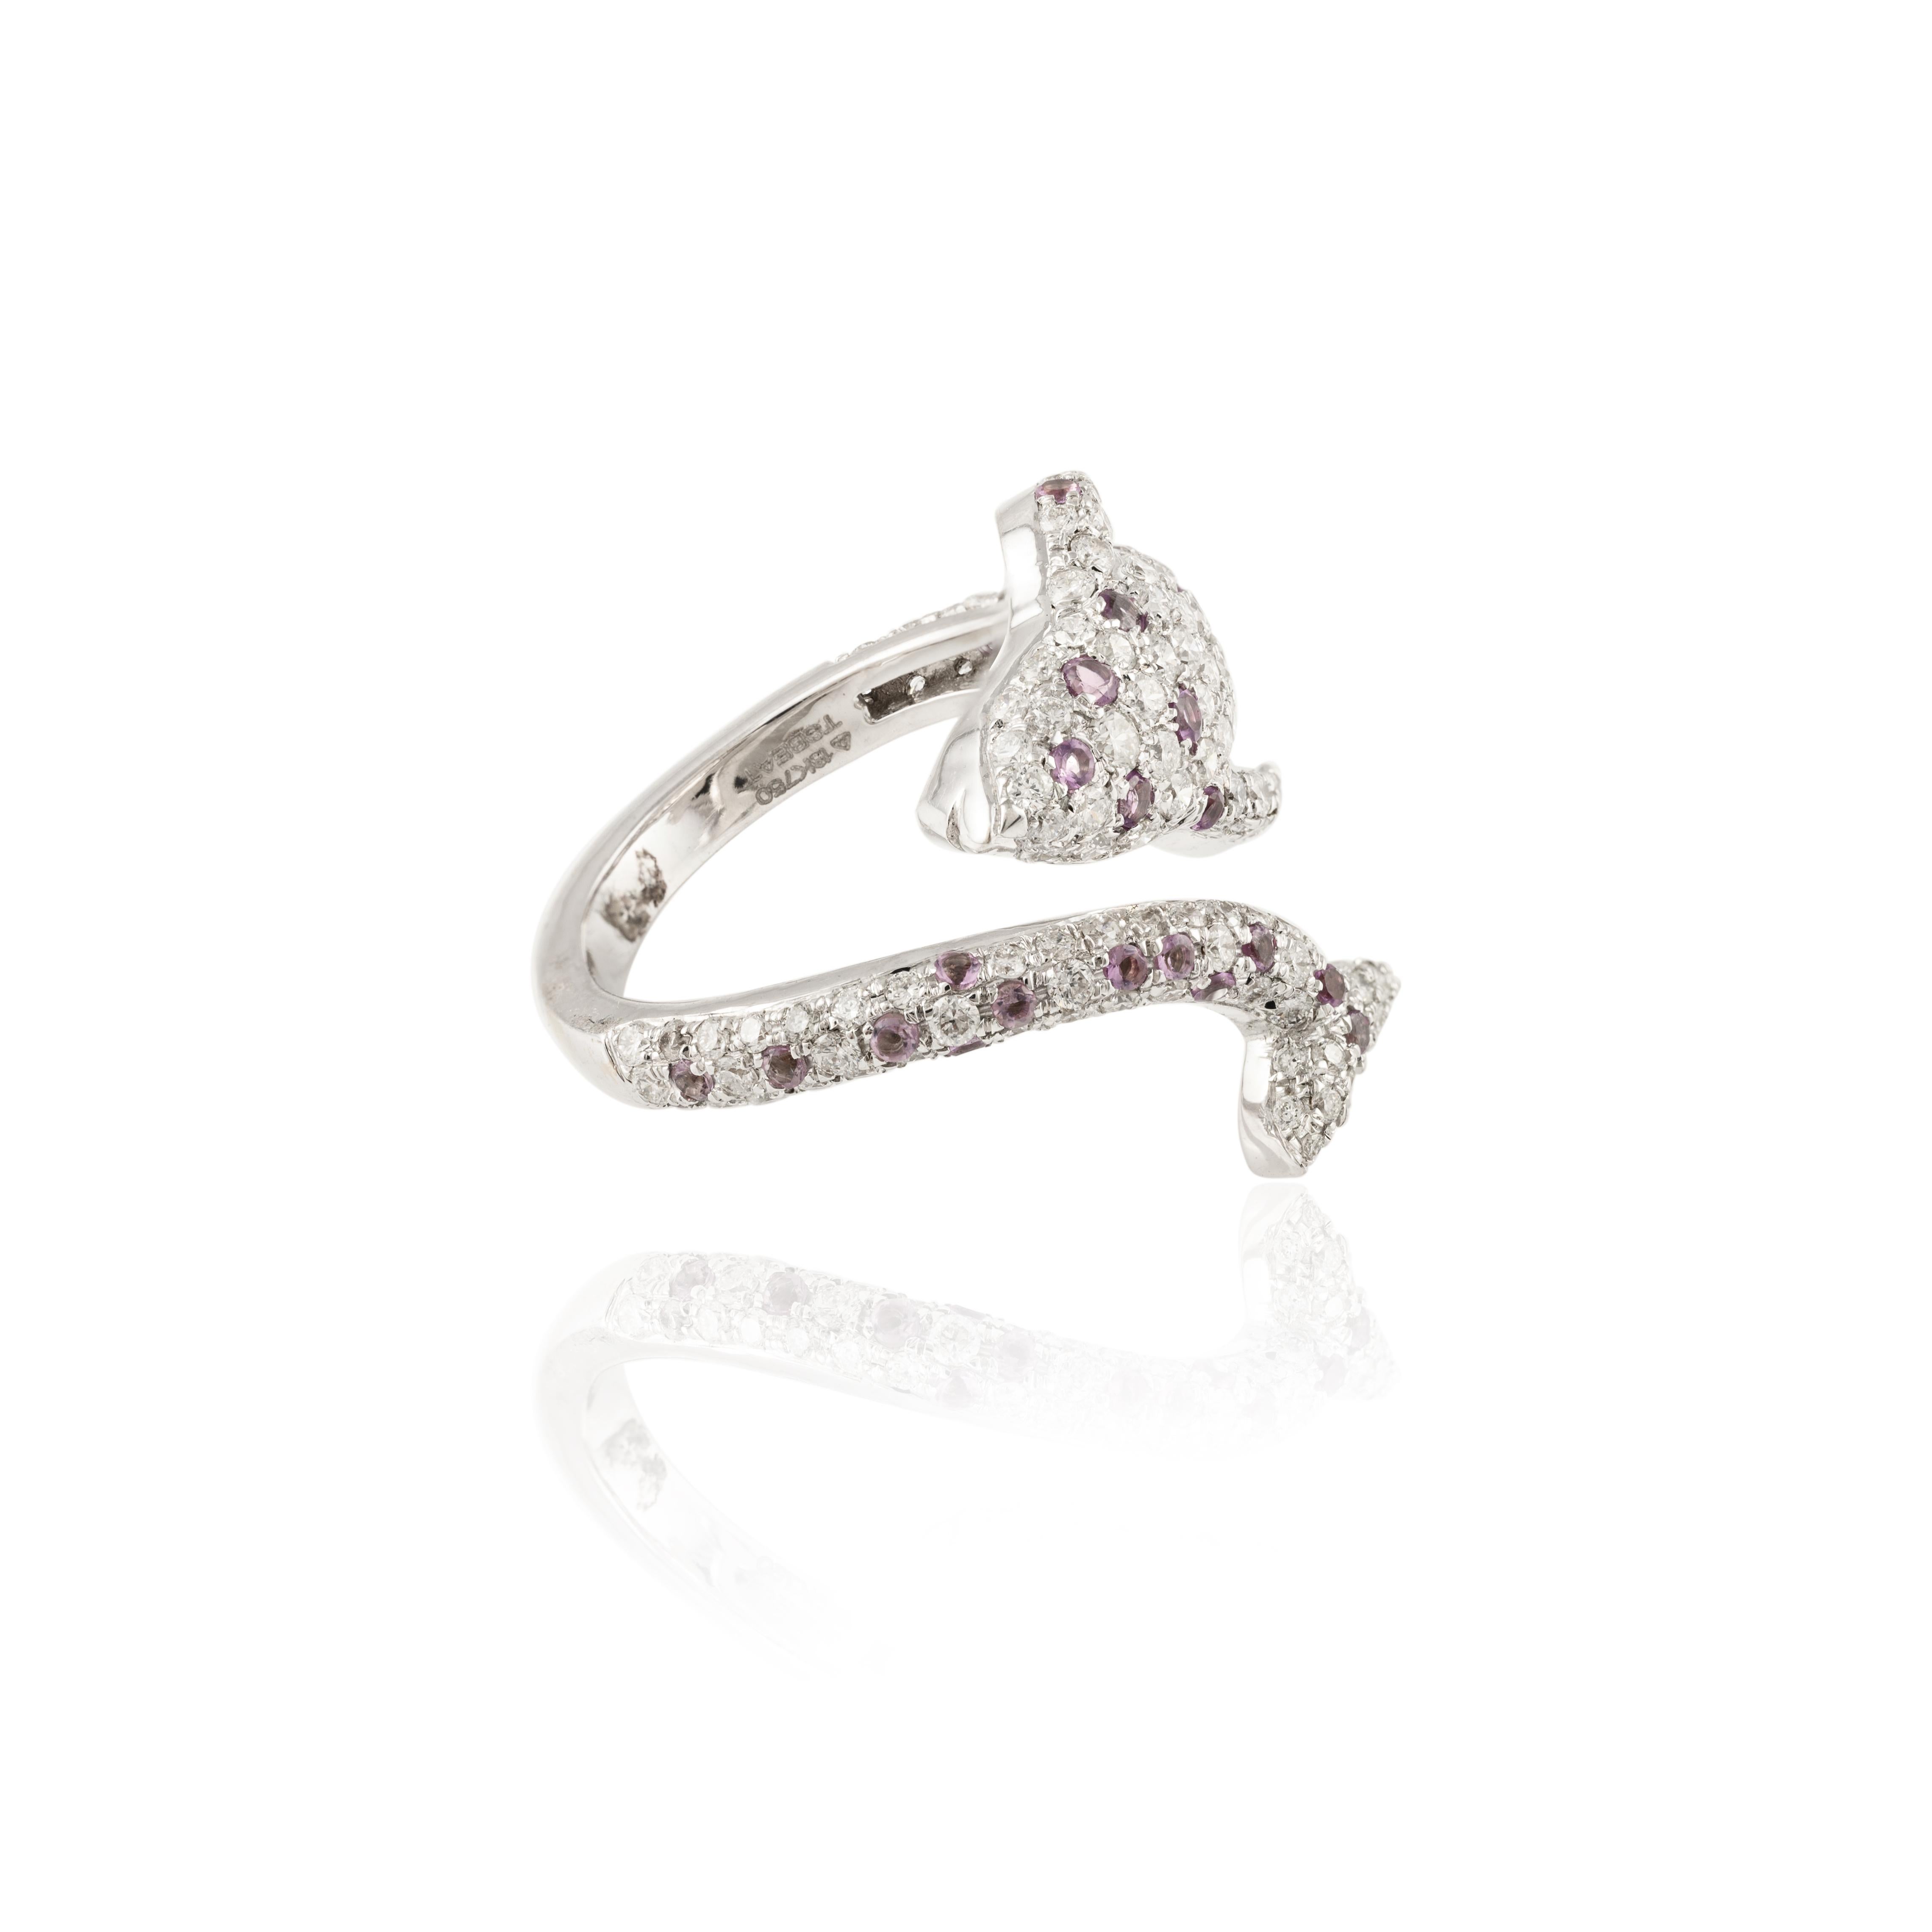 For Sale:  18k Solid White Gold Pave Set Amethyst and Diamond Dolphin Bypass Ring 7